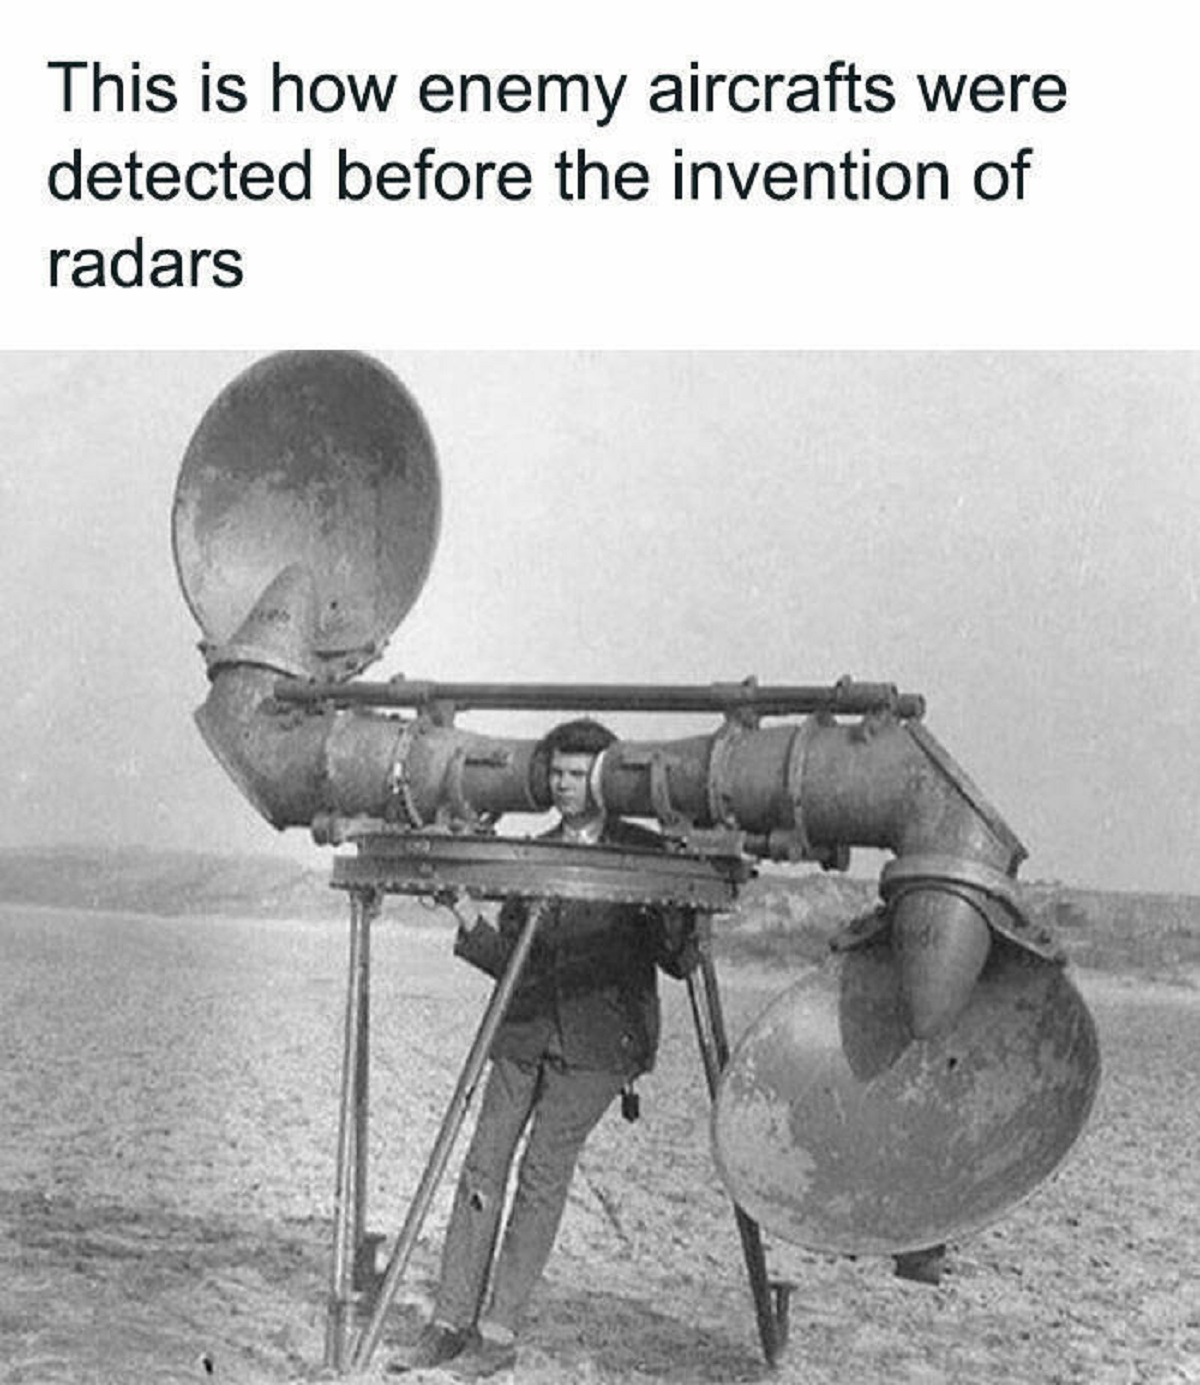 pre radar listener - This is how enemy aircrafts were detected before the invention of radars